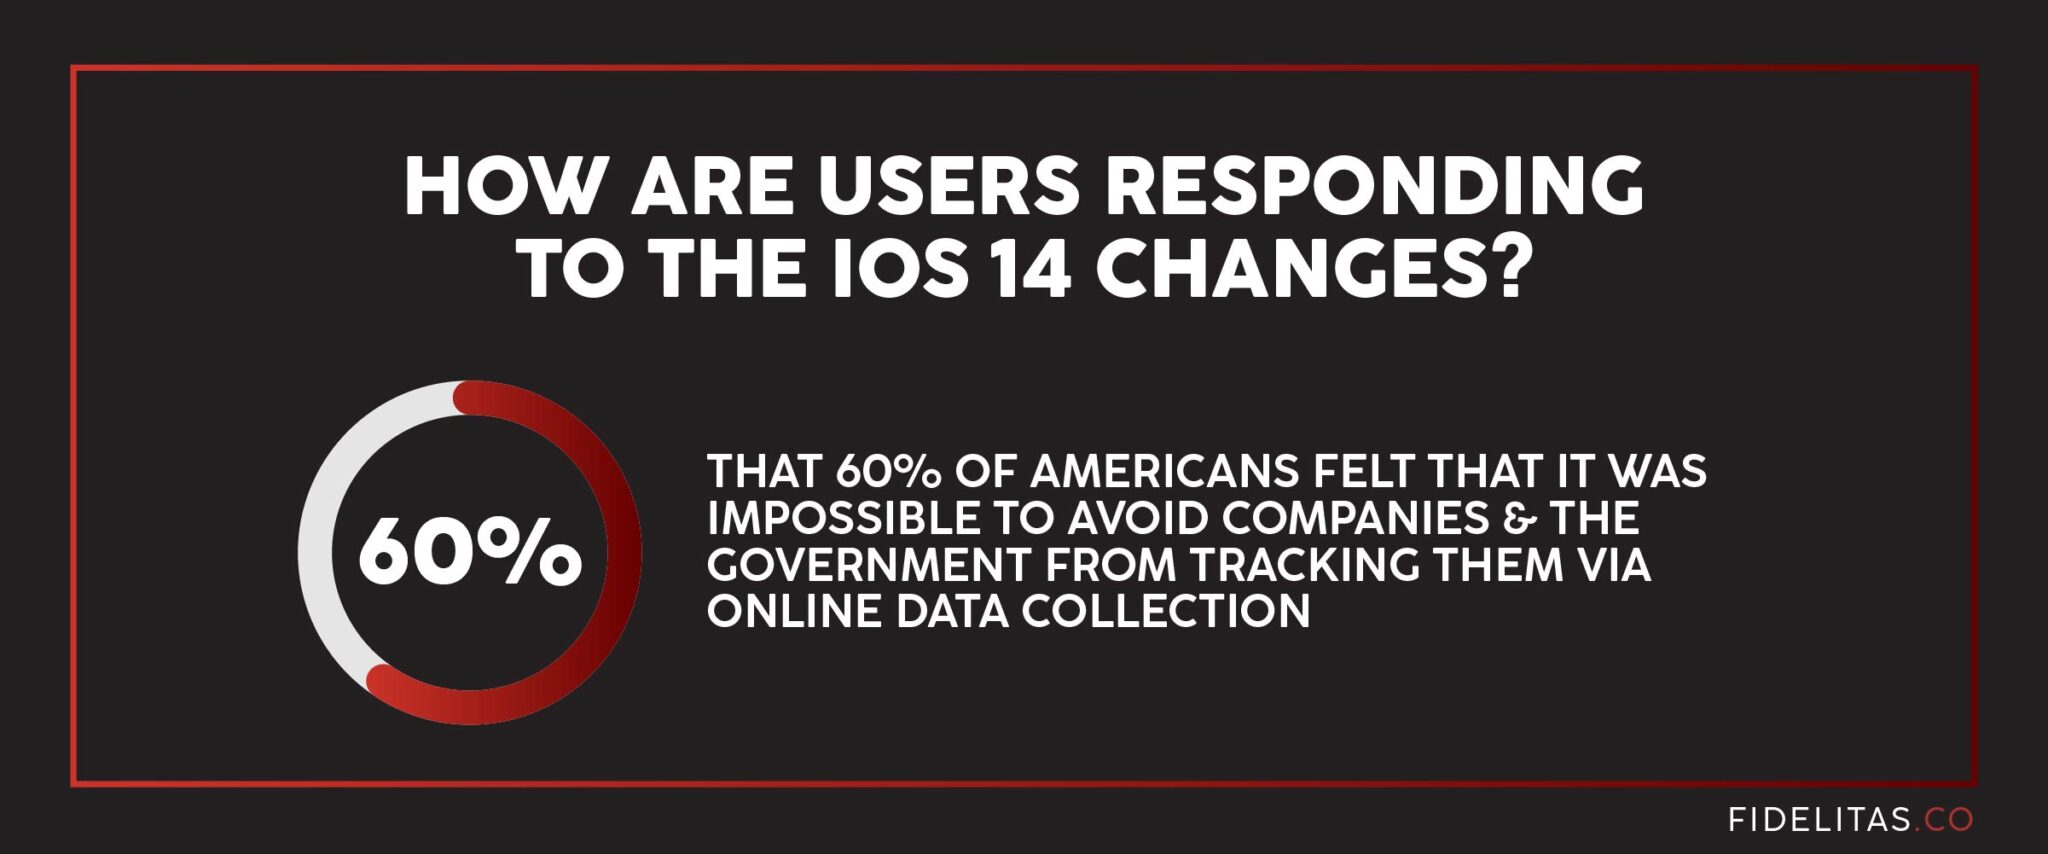 How Are Users Responding to the iOS 14 Changes?